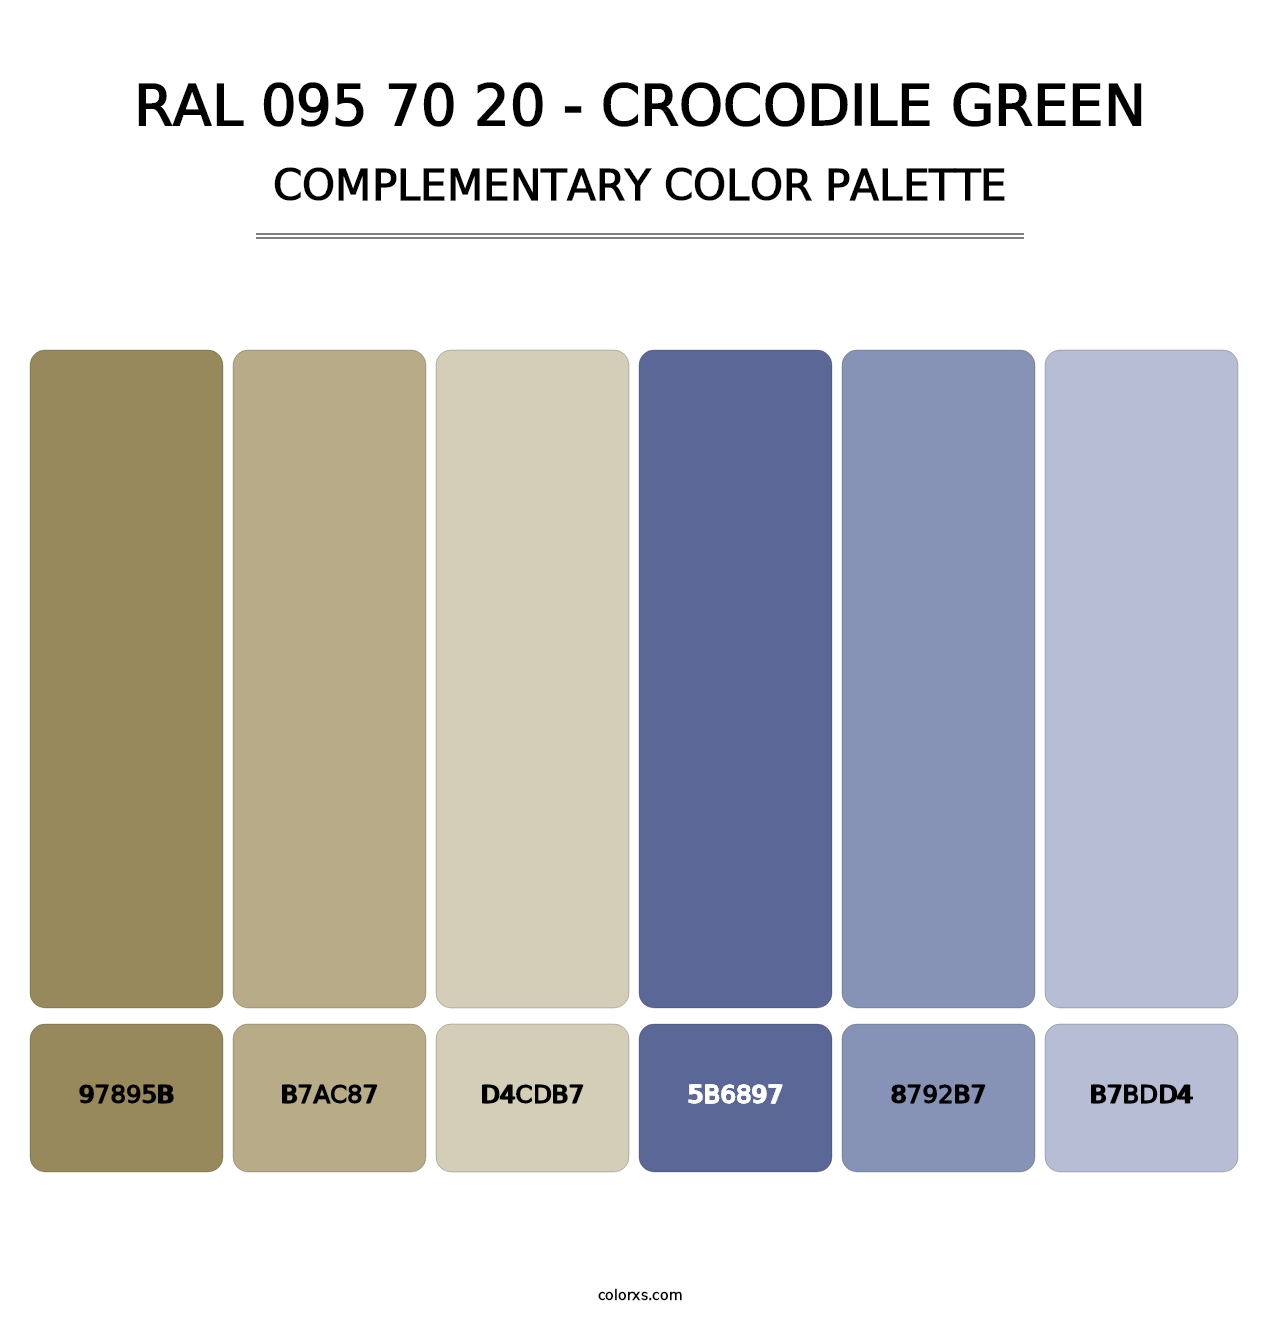 RAL 095 70 20 - Crocodile Green - Complementary Color Palette